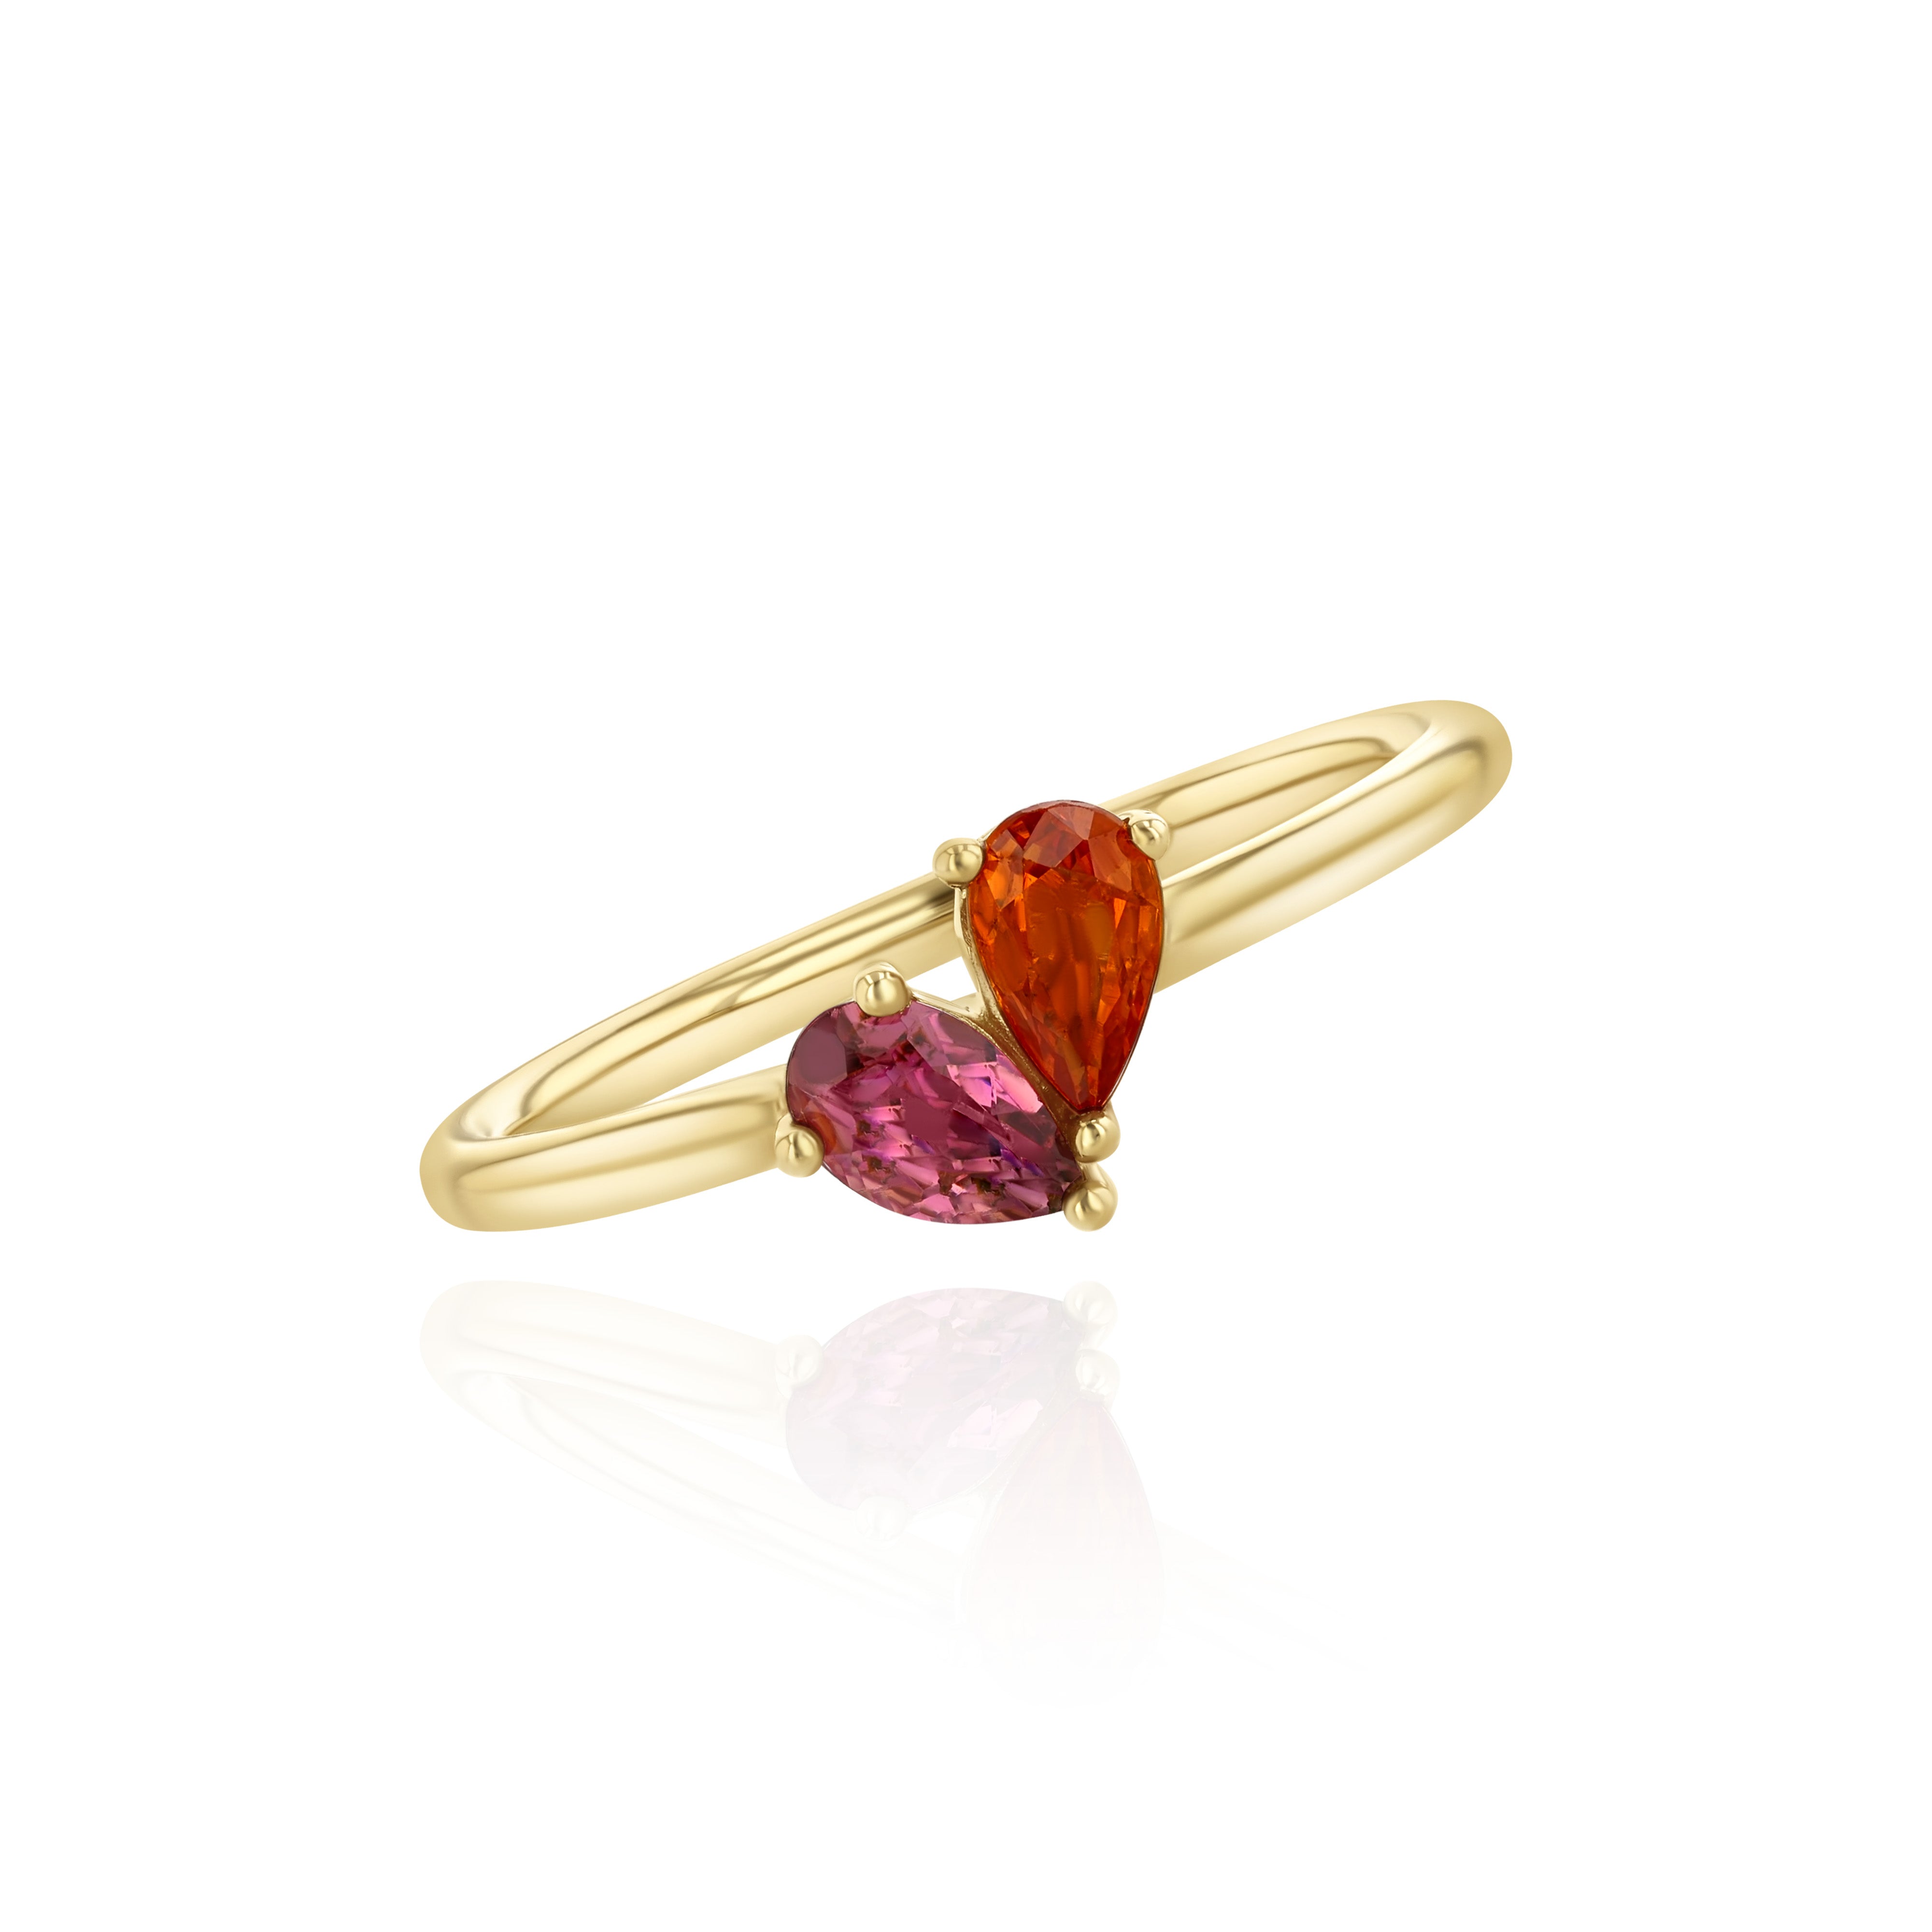 Yellow Gold ring with pear shaped Pink Sapphire and Orange Sapphire, Small